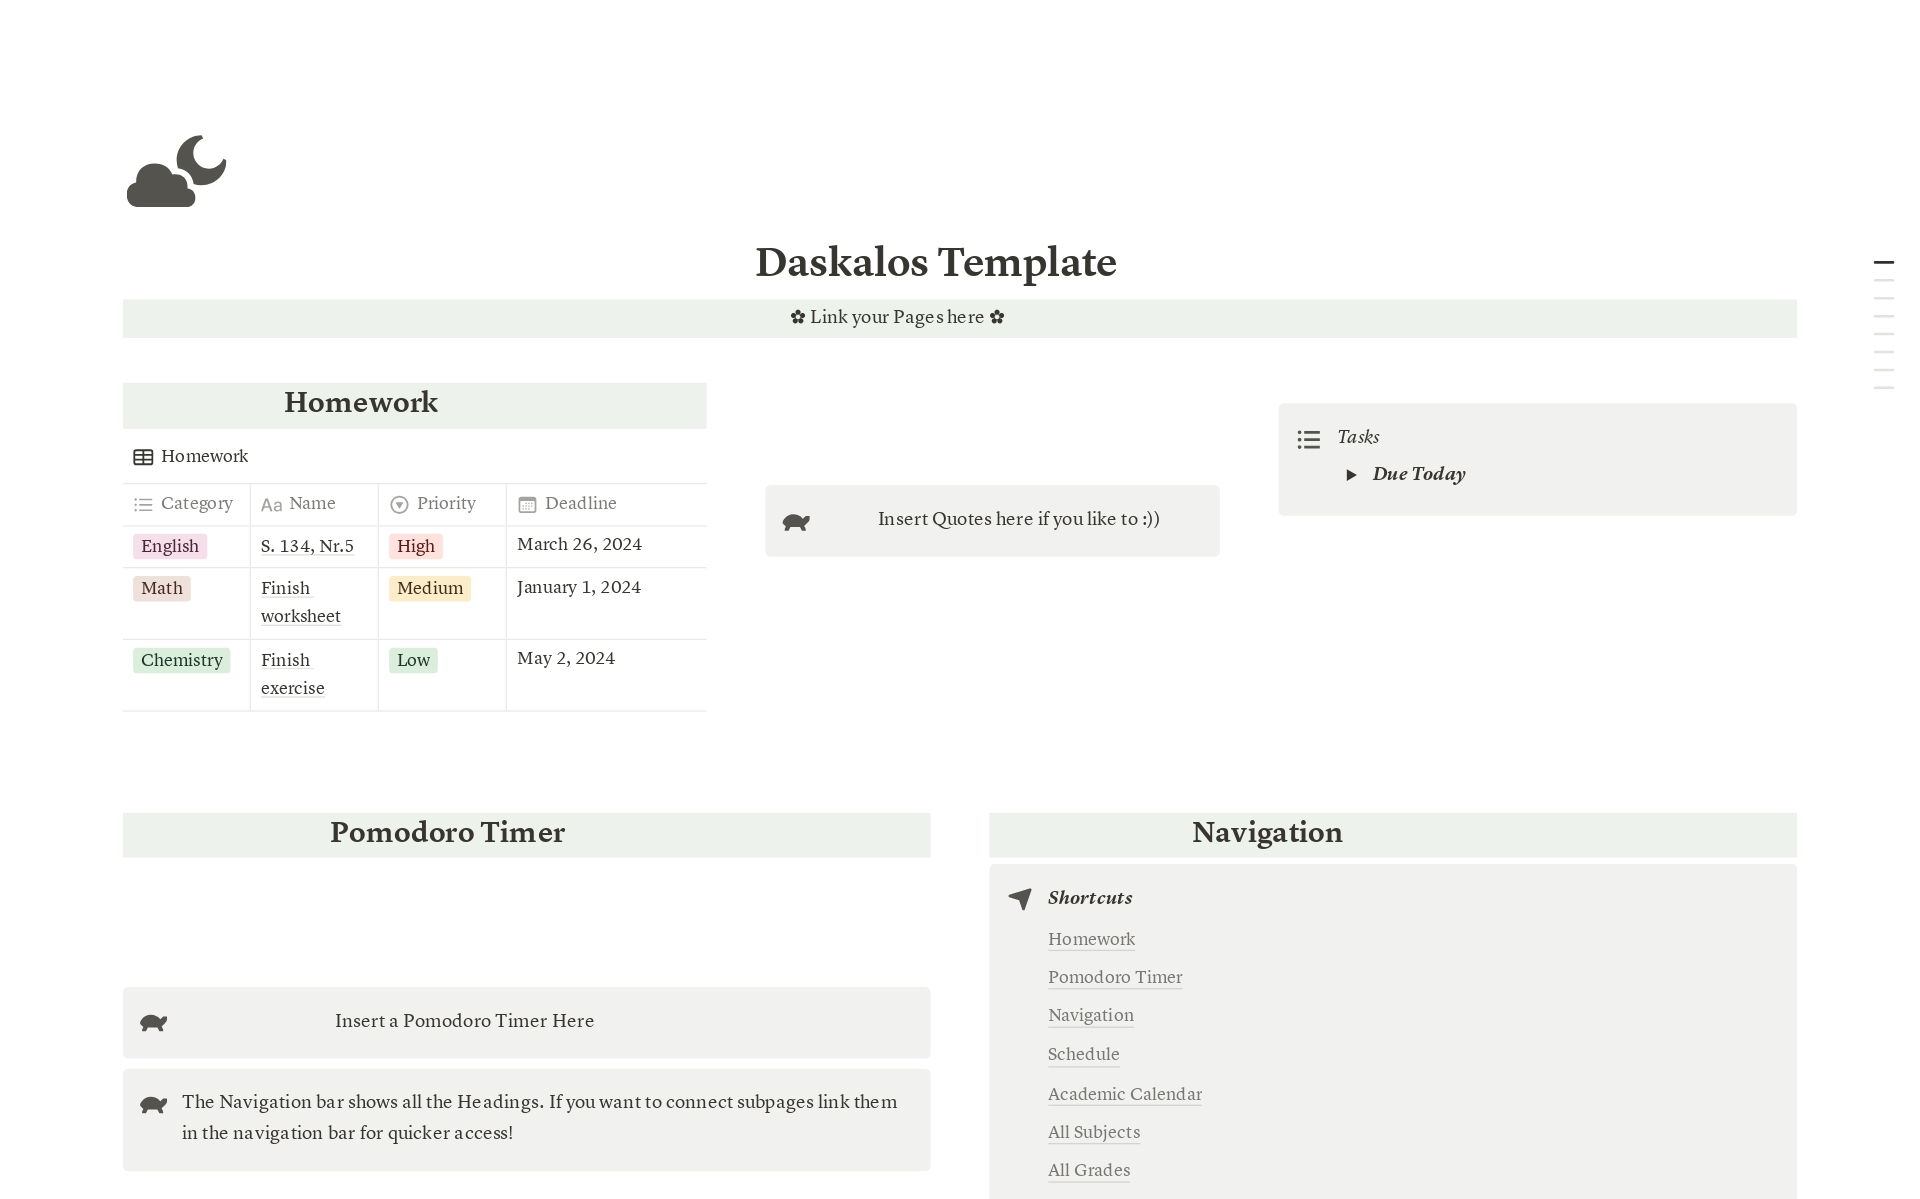 Be an Academic Weapon.

Tired of having all your school material scattered across your materials? The Greek-inspired “Daskatlos” Template is designed to make your academic life as easy as possible.